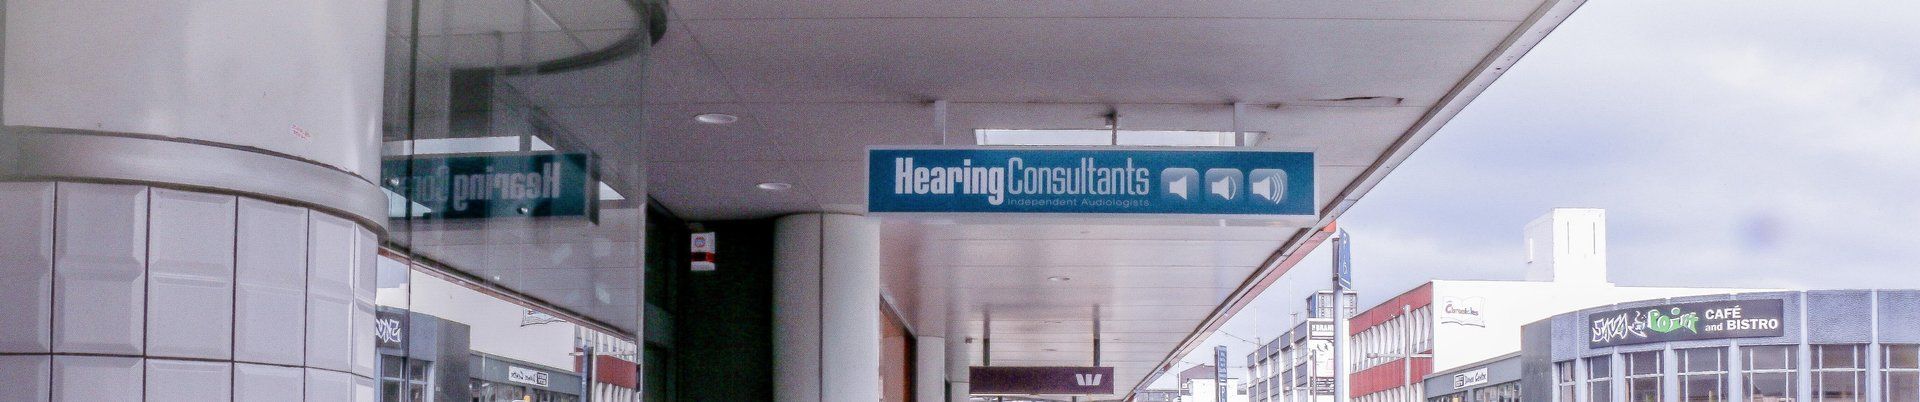 Hearing Consultants Locations Wellington and Masterton